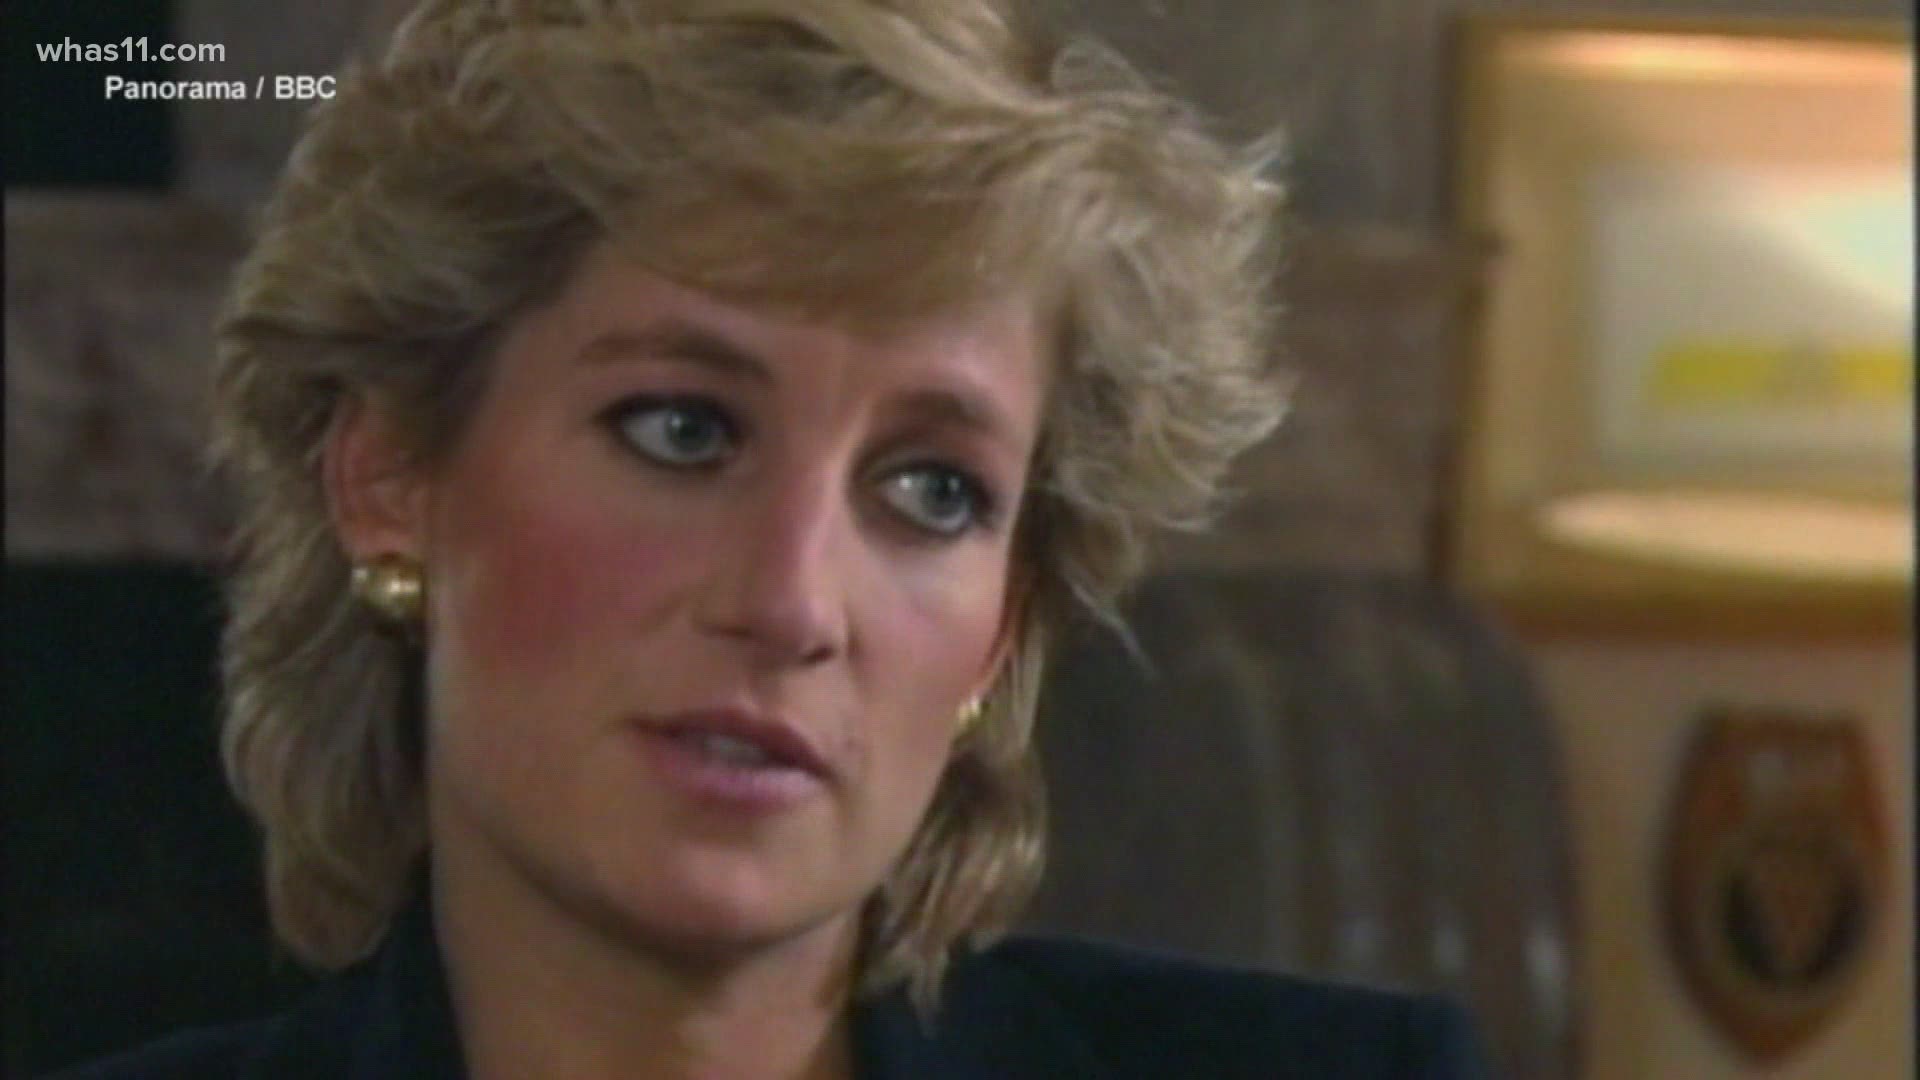 Martin Bashir managed to scoop the world in that controversial 1995 panorama interview with Diana, Princess of Wales.